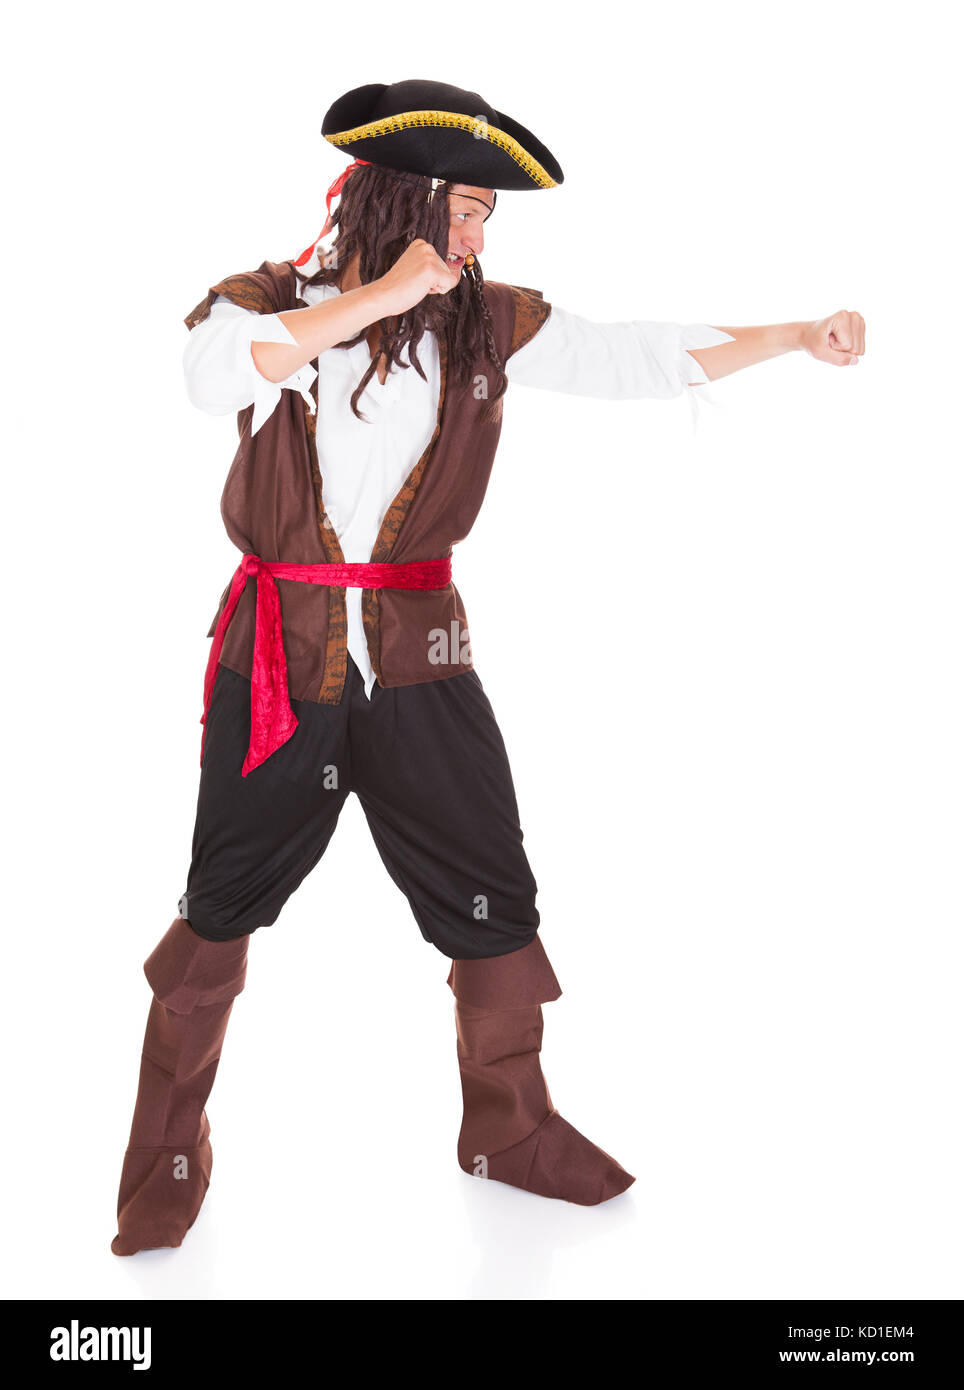 Portrait Of A Pirate Punching Over White Background Stock Photo